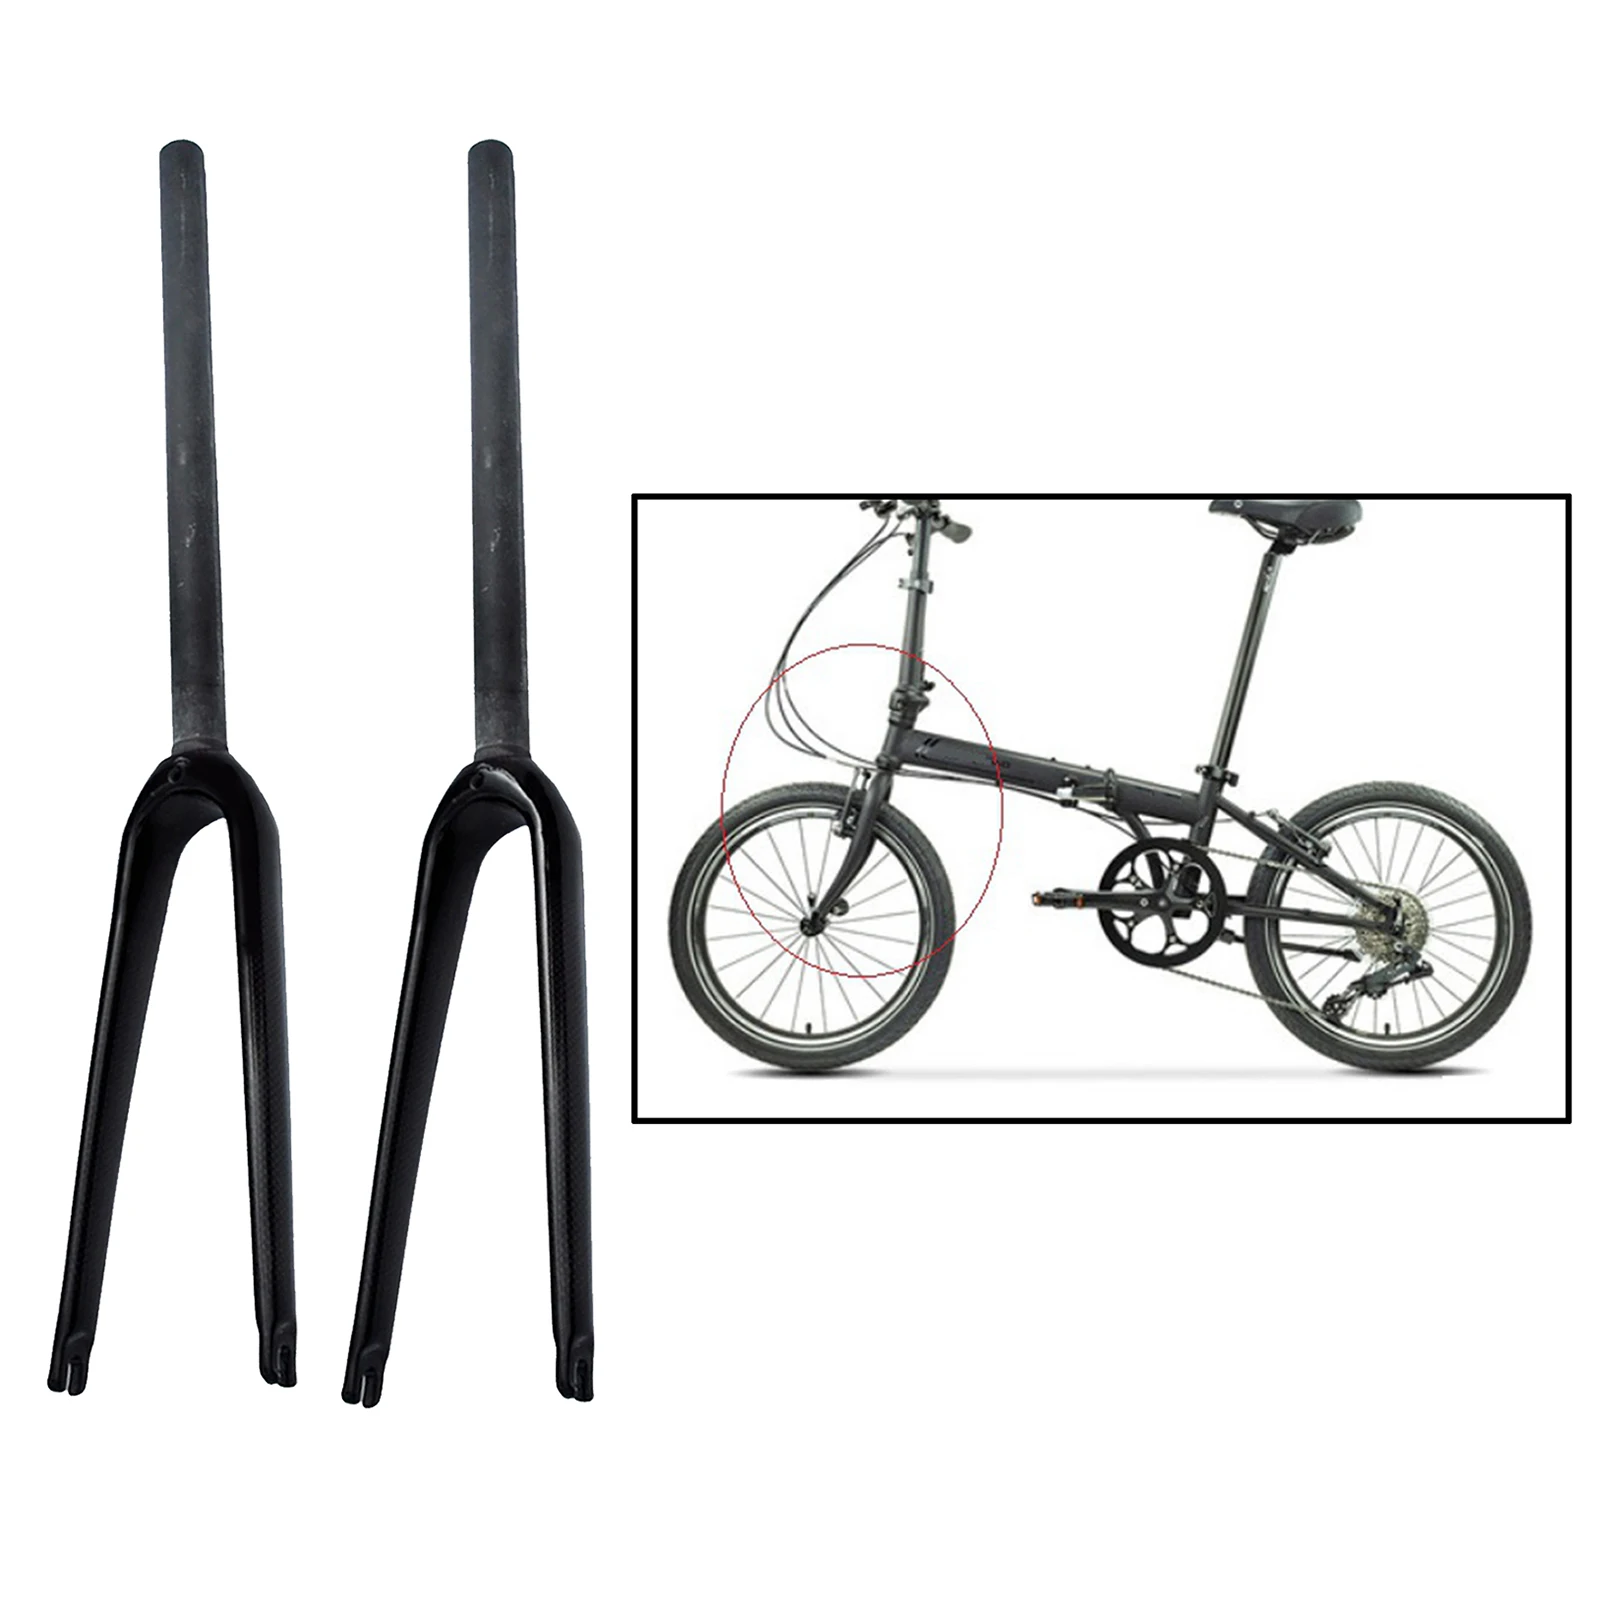 Deluxe 20 inch Rigid Fork Folding Bicycle MTB Road Cruiser Bike V-Brake Mounted 1-1/8 `` Replacement Fork Component Black